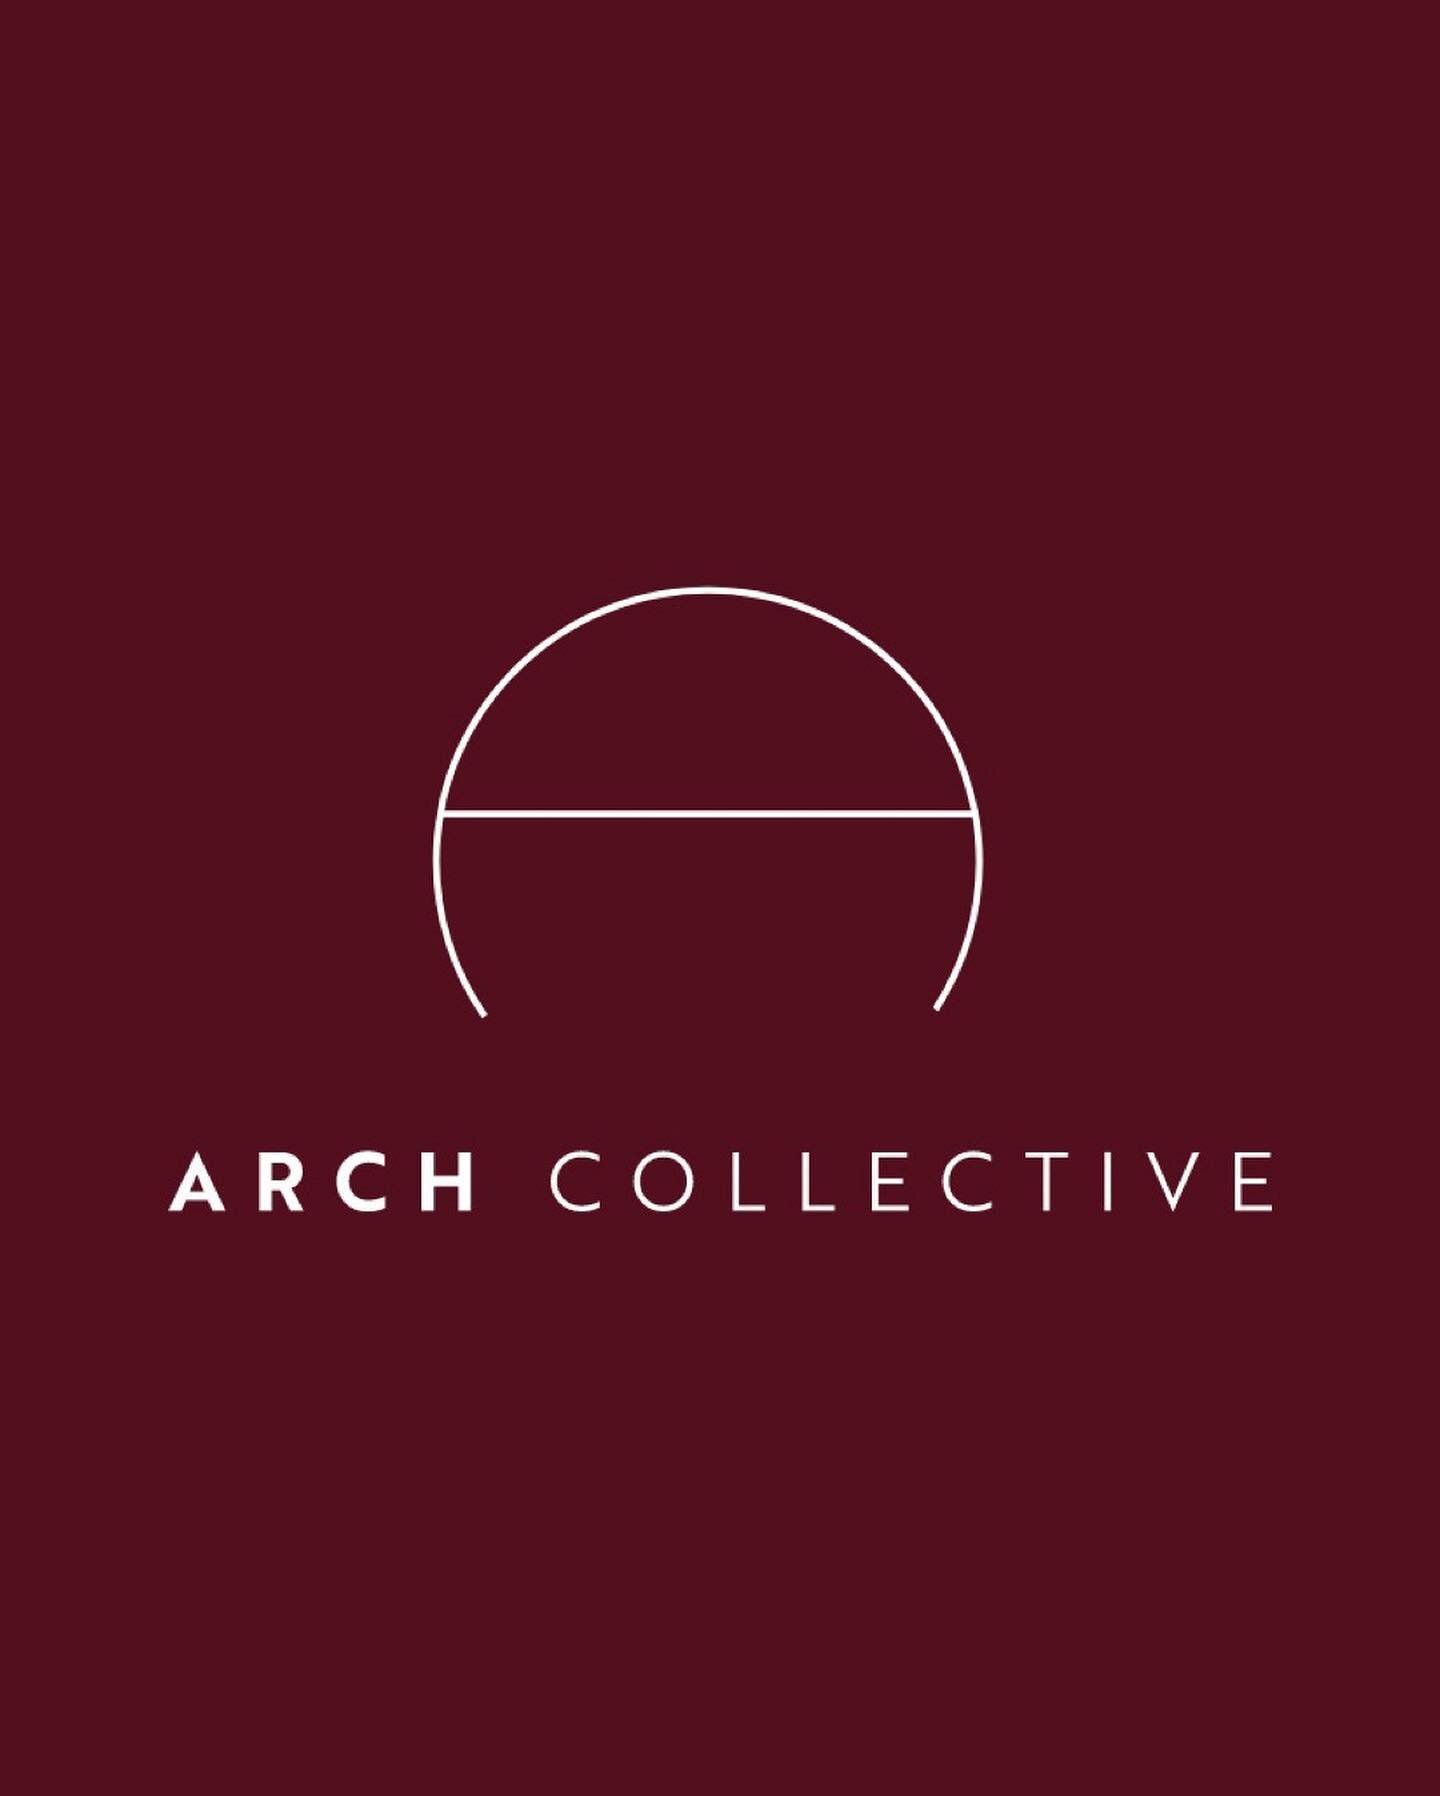 The Arch Collective logomark 🥰  scroll through to learn about the meaning behind the mark ✨